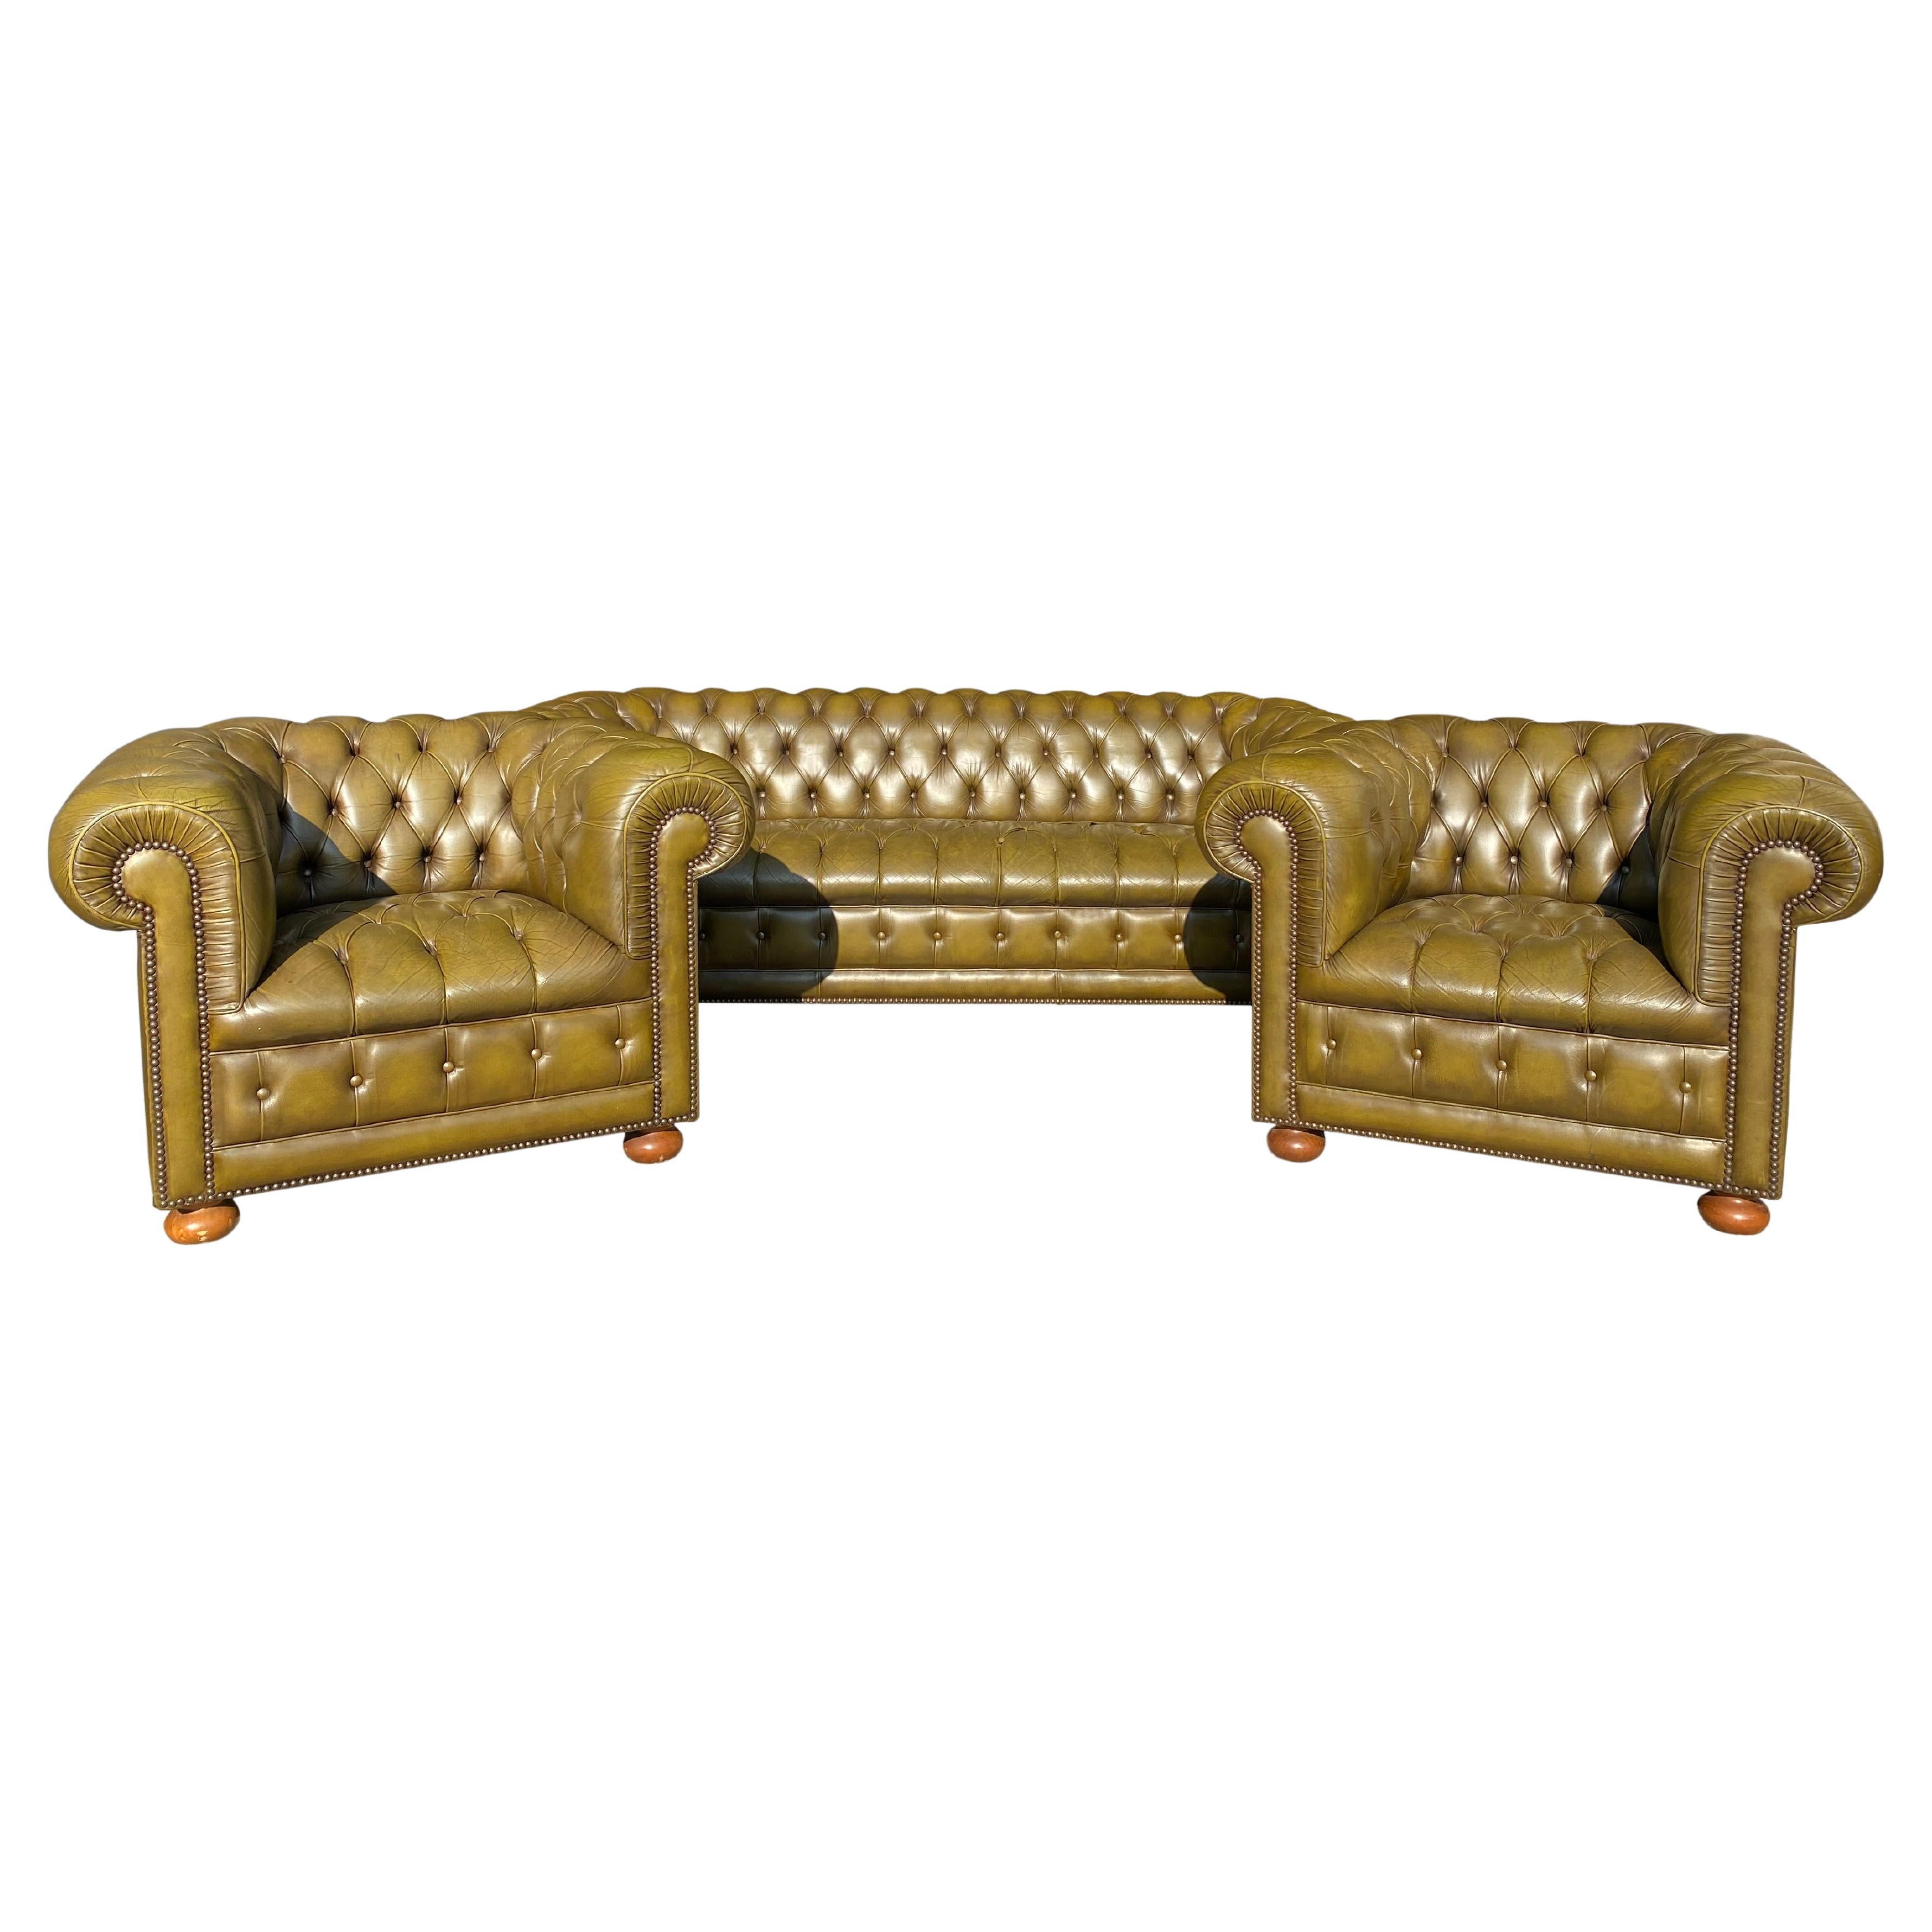 20th Century Three Piece Green Leather Chesterfield Suite For Sale